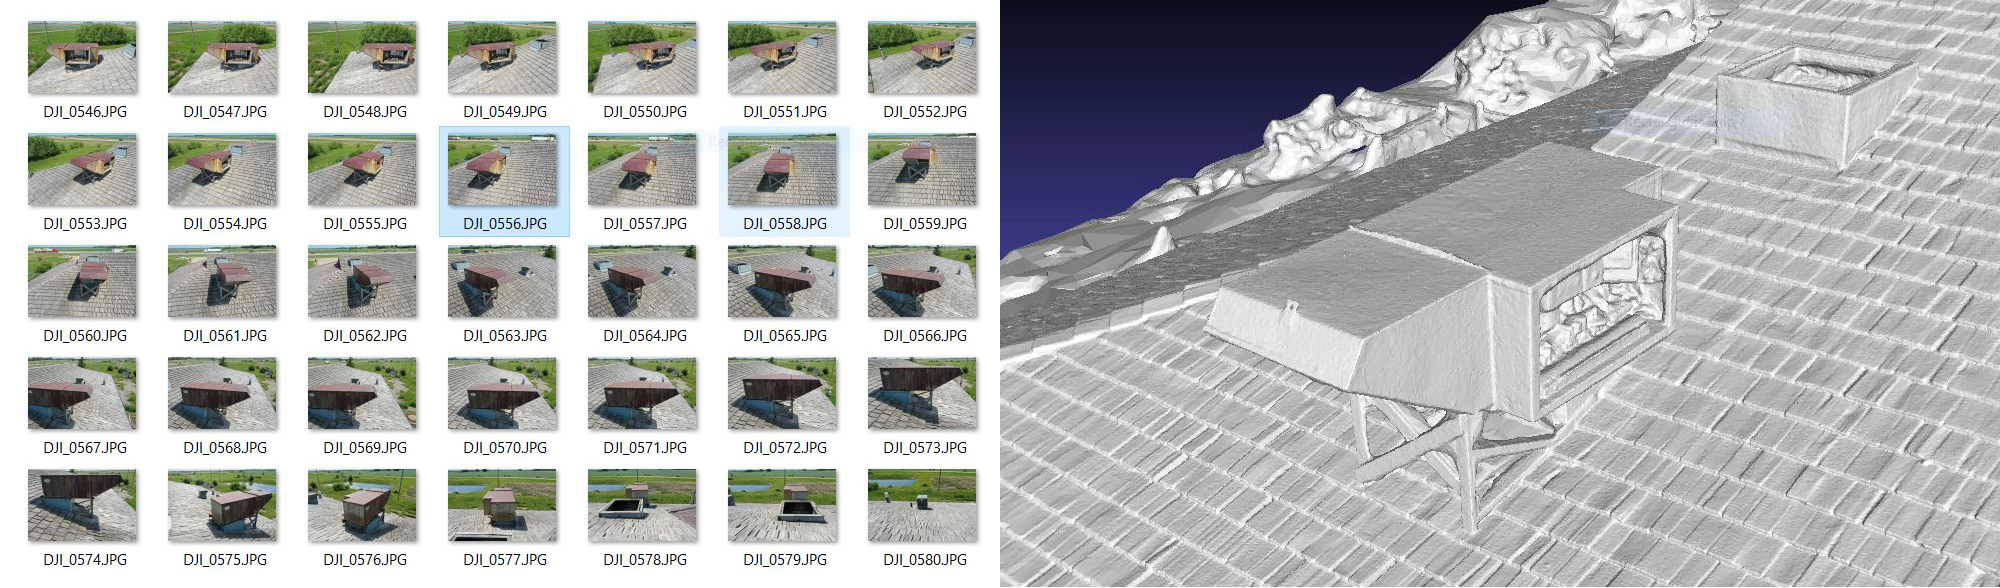 dronephotos and render of vent hood on roof